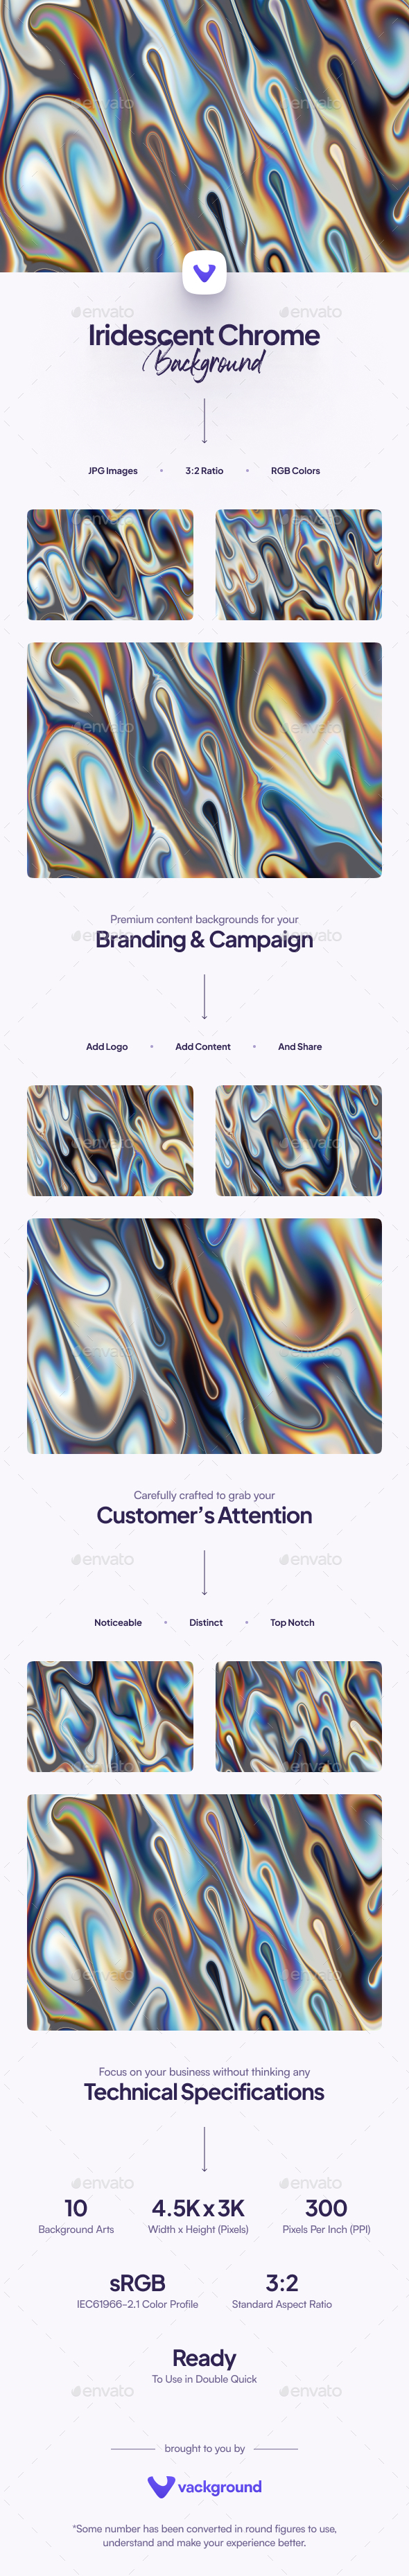 [DOWNLOAD]Iridescent Chrome Background